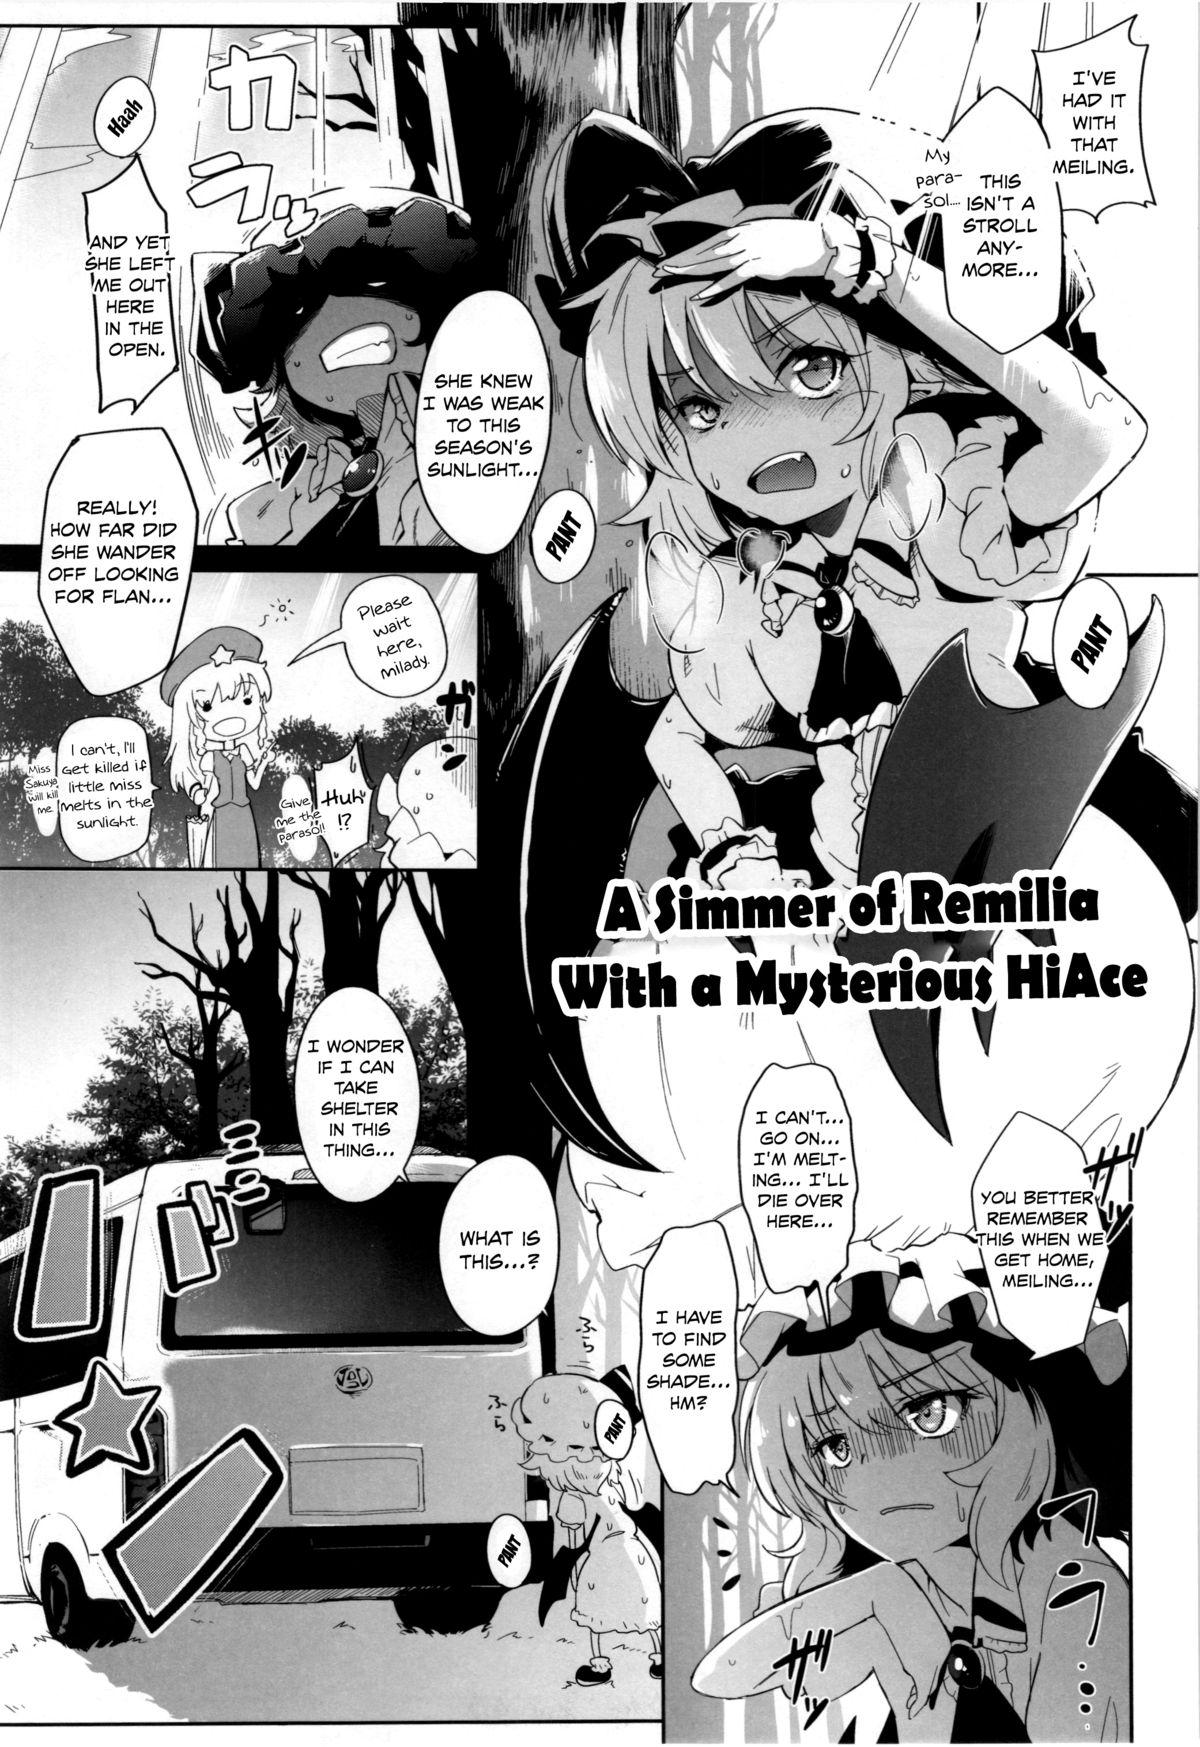 Lesbian Sex Remilia to Fushigi no HiAce | A Simmer of Remilia With a Mysterious HiAce - Touhou project Interview - Page 1